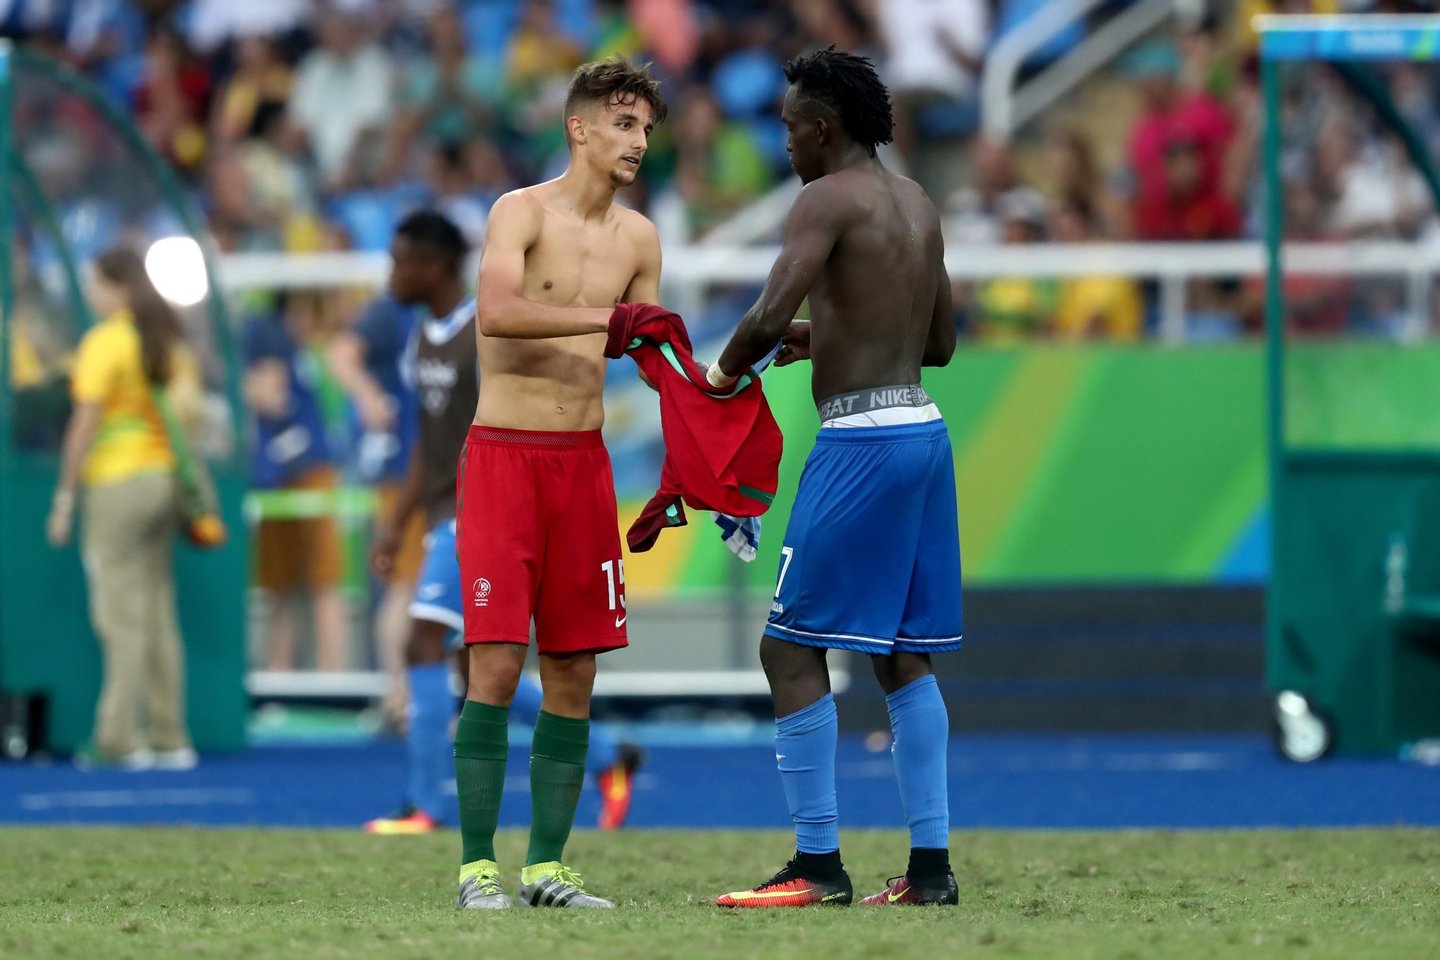 RIO DE JANEIRO, BRAZIL - AUGUST 07: Fernando (L) of Portugal change the match jersey with Alberth Elis of Honduras after the Men's Group D first round match between Honduras and Portugal during the Rio 2016 Olympic Games at the Olympic Stadium on August 7, 2016 in Rio de Janeiro, Brazil. (Photo by Alexander Hassenstein/Getty Images)